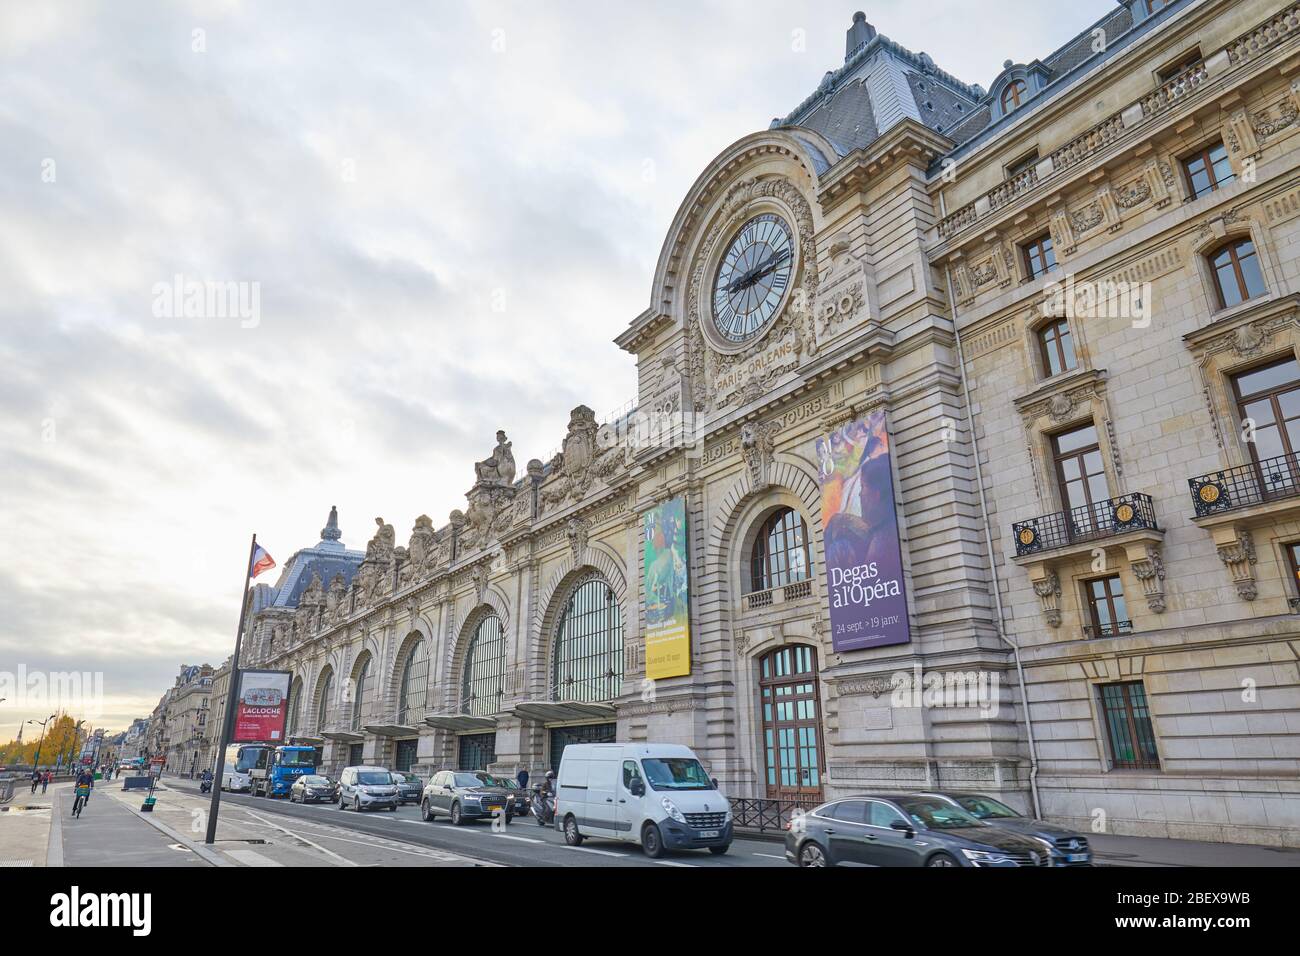 PARIS, FRANCE - NOVEMBER 8, 2019: Gare D'Orsay or Orsay museum building and street with traffic in a cloudy day in Paris Stock Photo